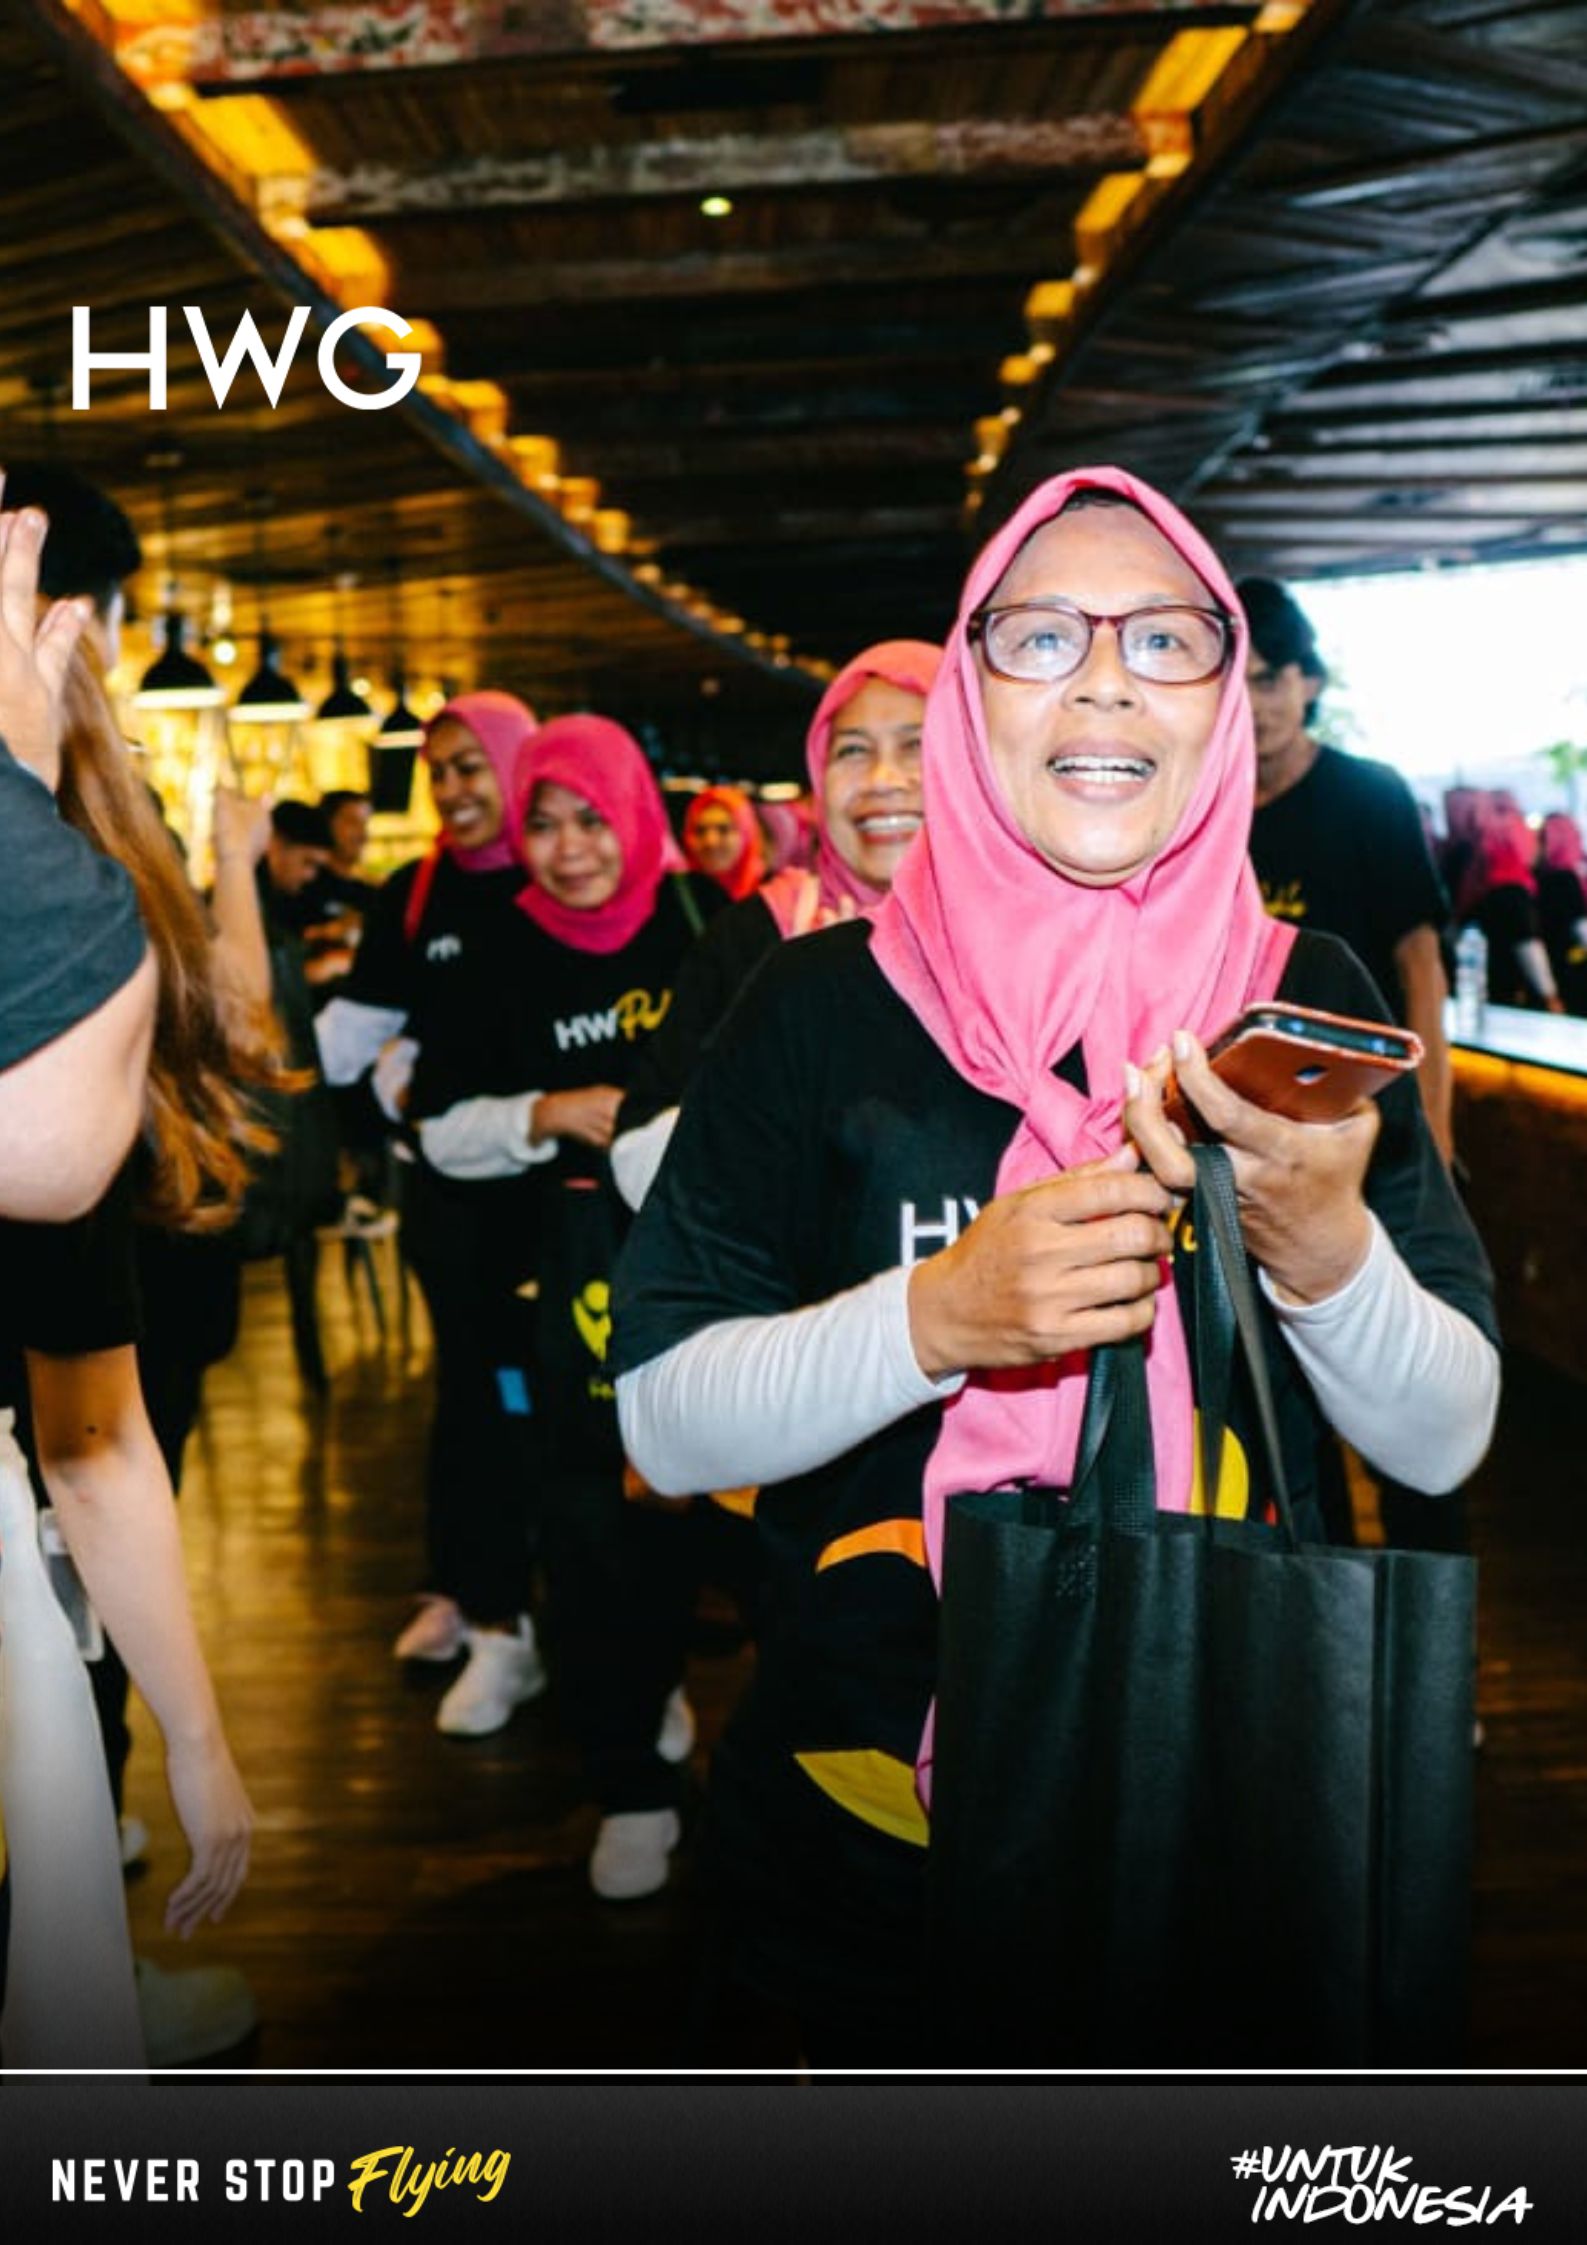 HW Group unites community with enchanting exercise and brings smiles through HW Peduli’s sembako giveaway